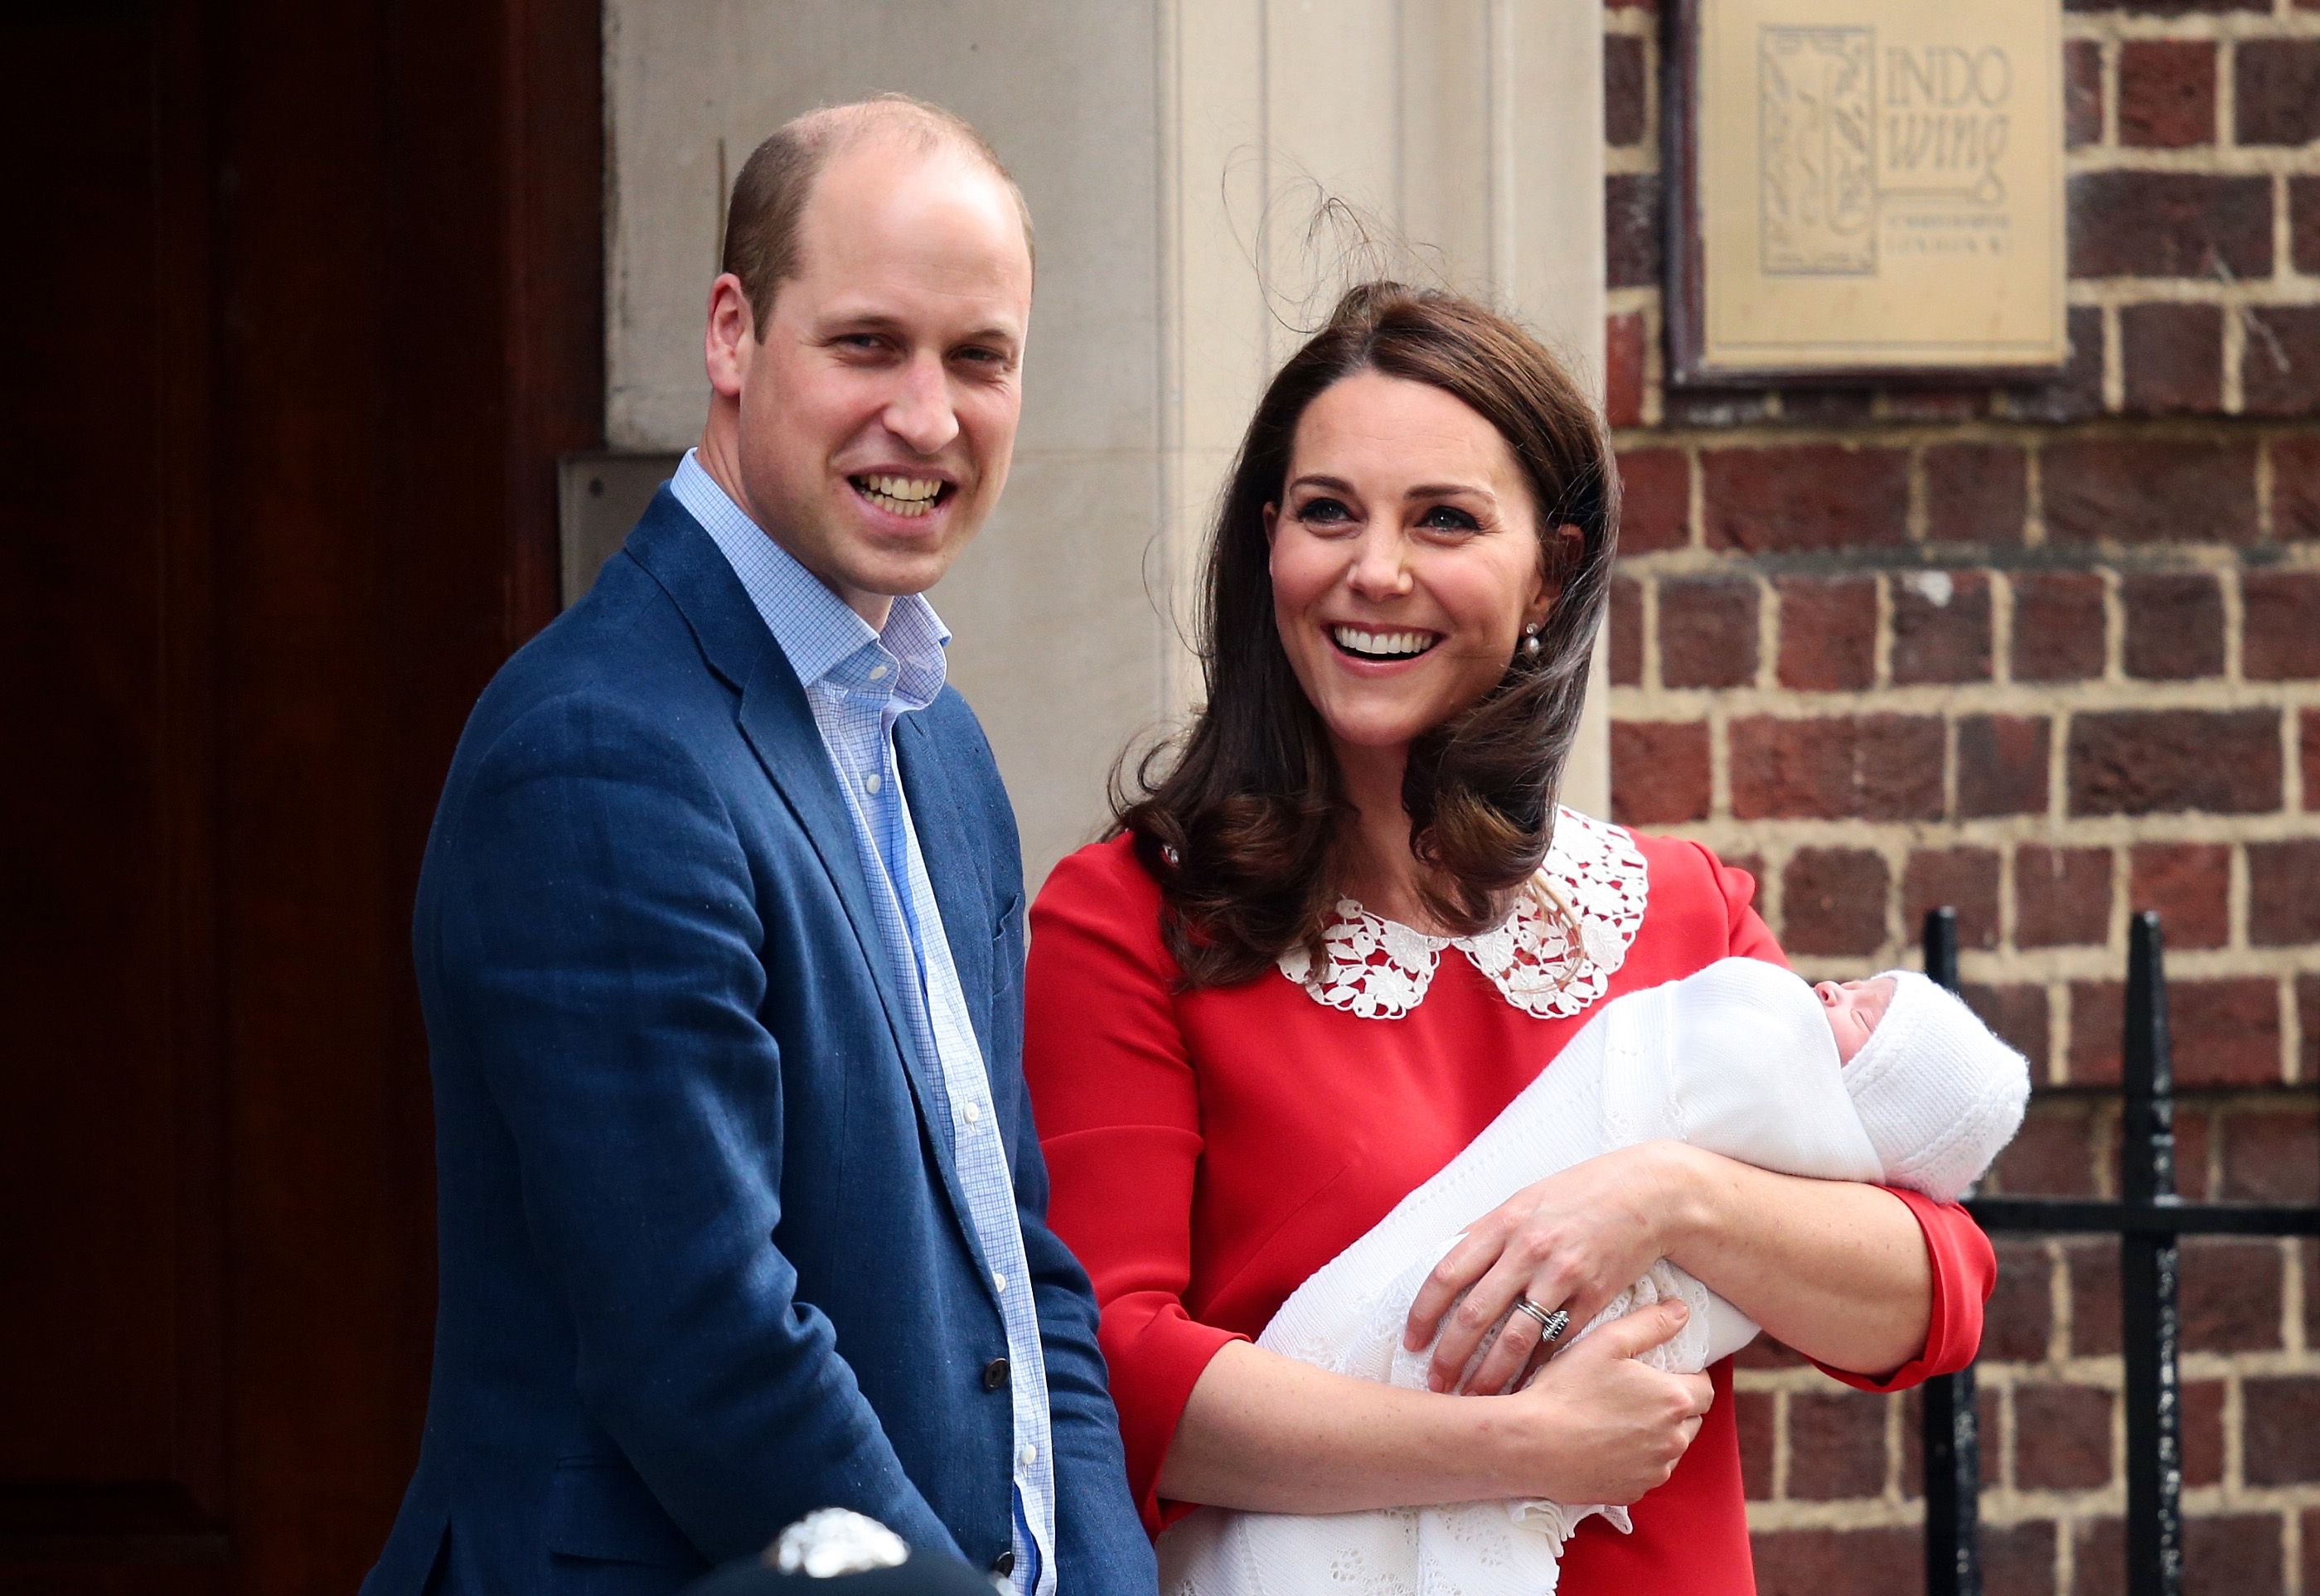 How to Pronounce Louis - How to Pronounce the Royal Baby's Name Louis